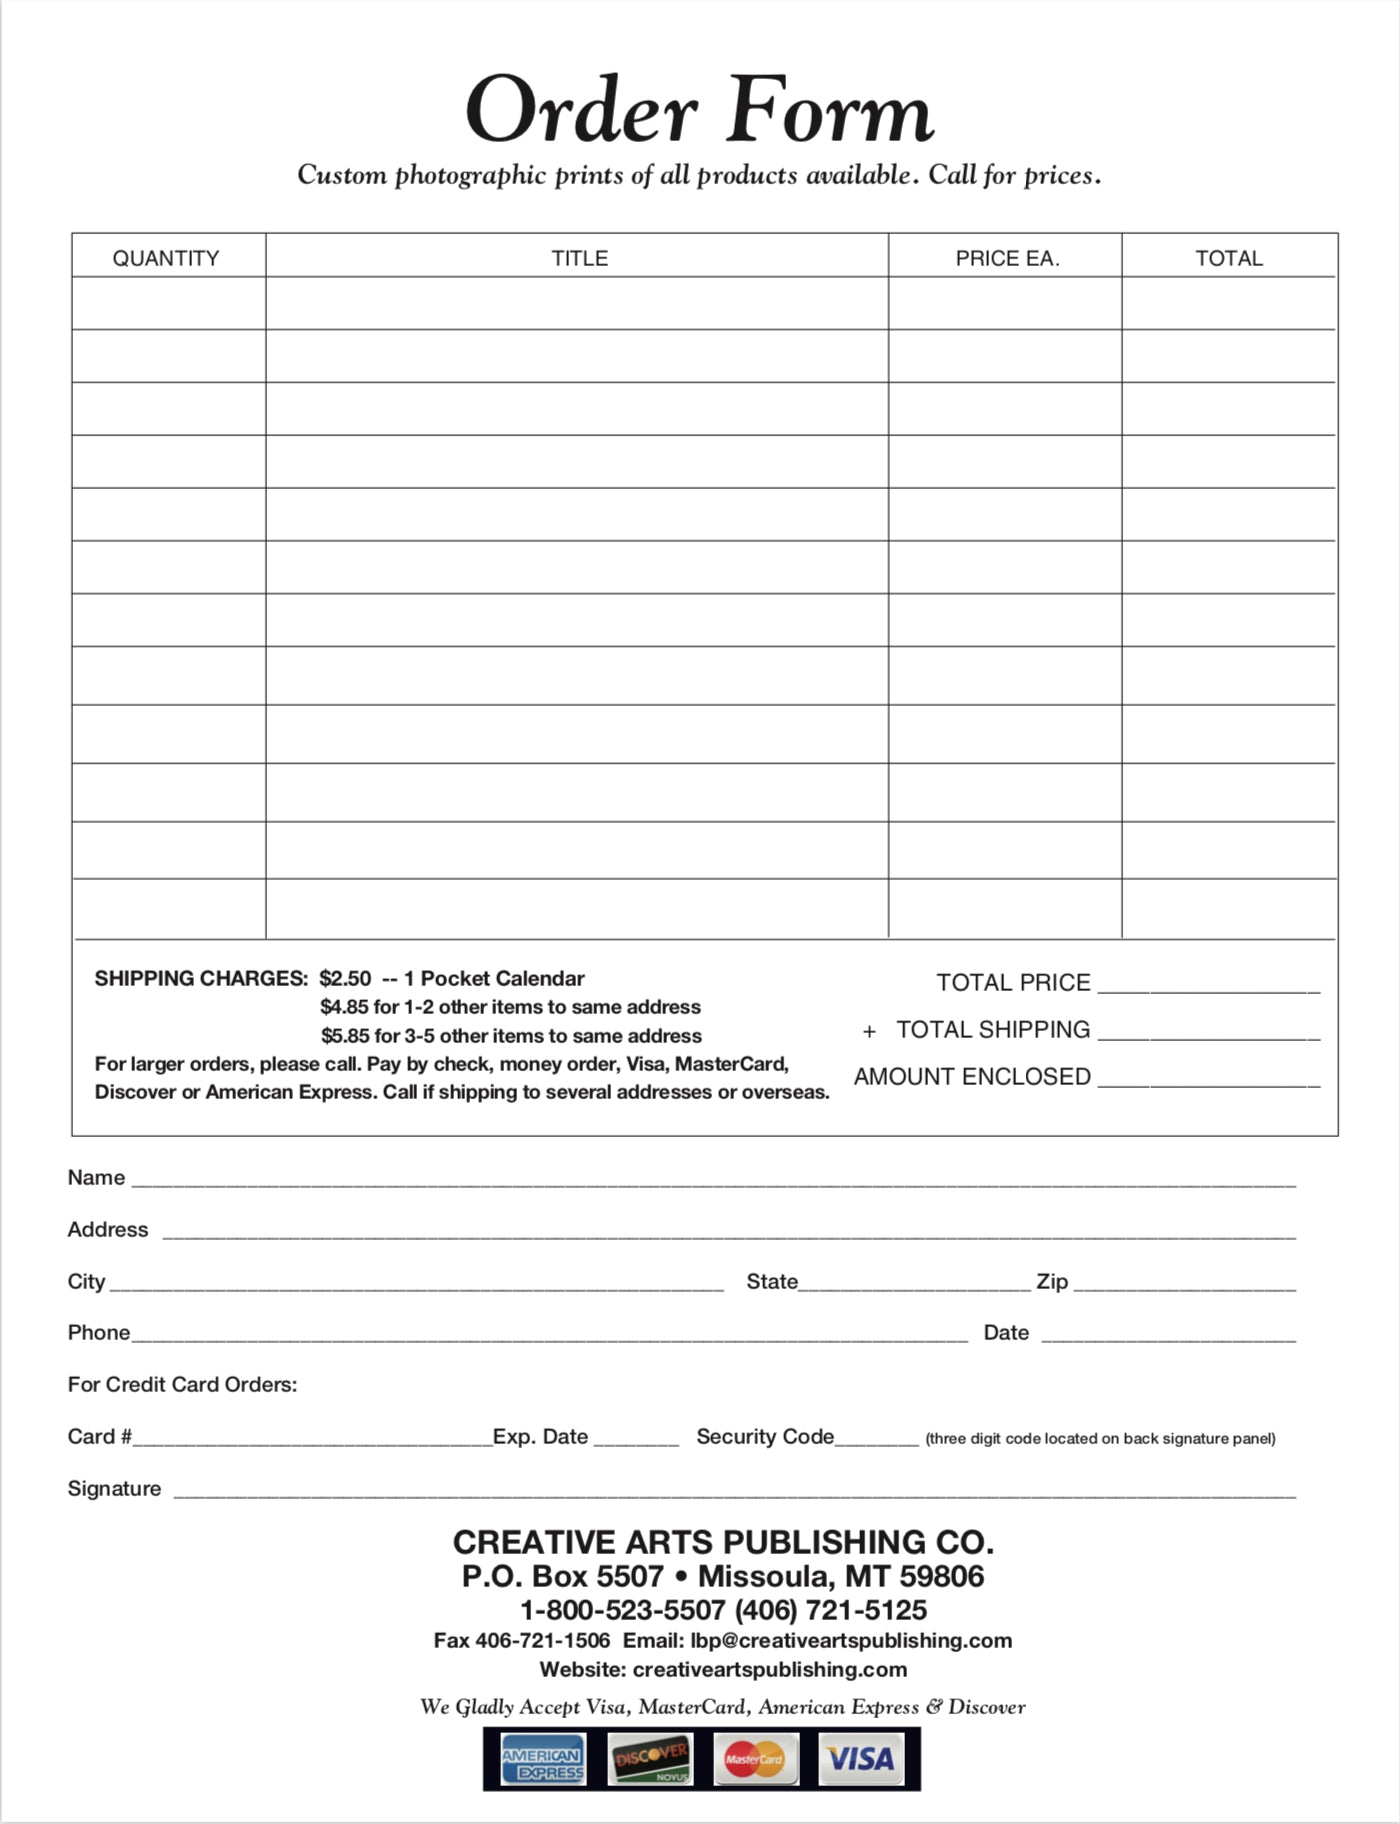 printable-order-forms-free-download-aashe